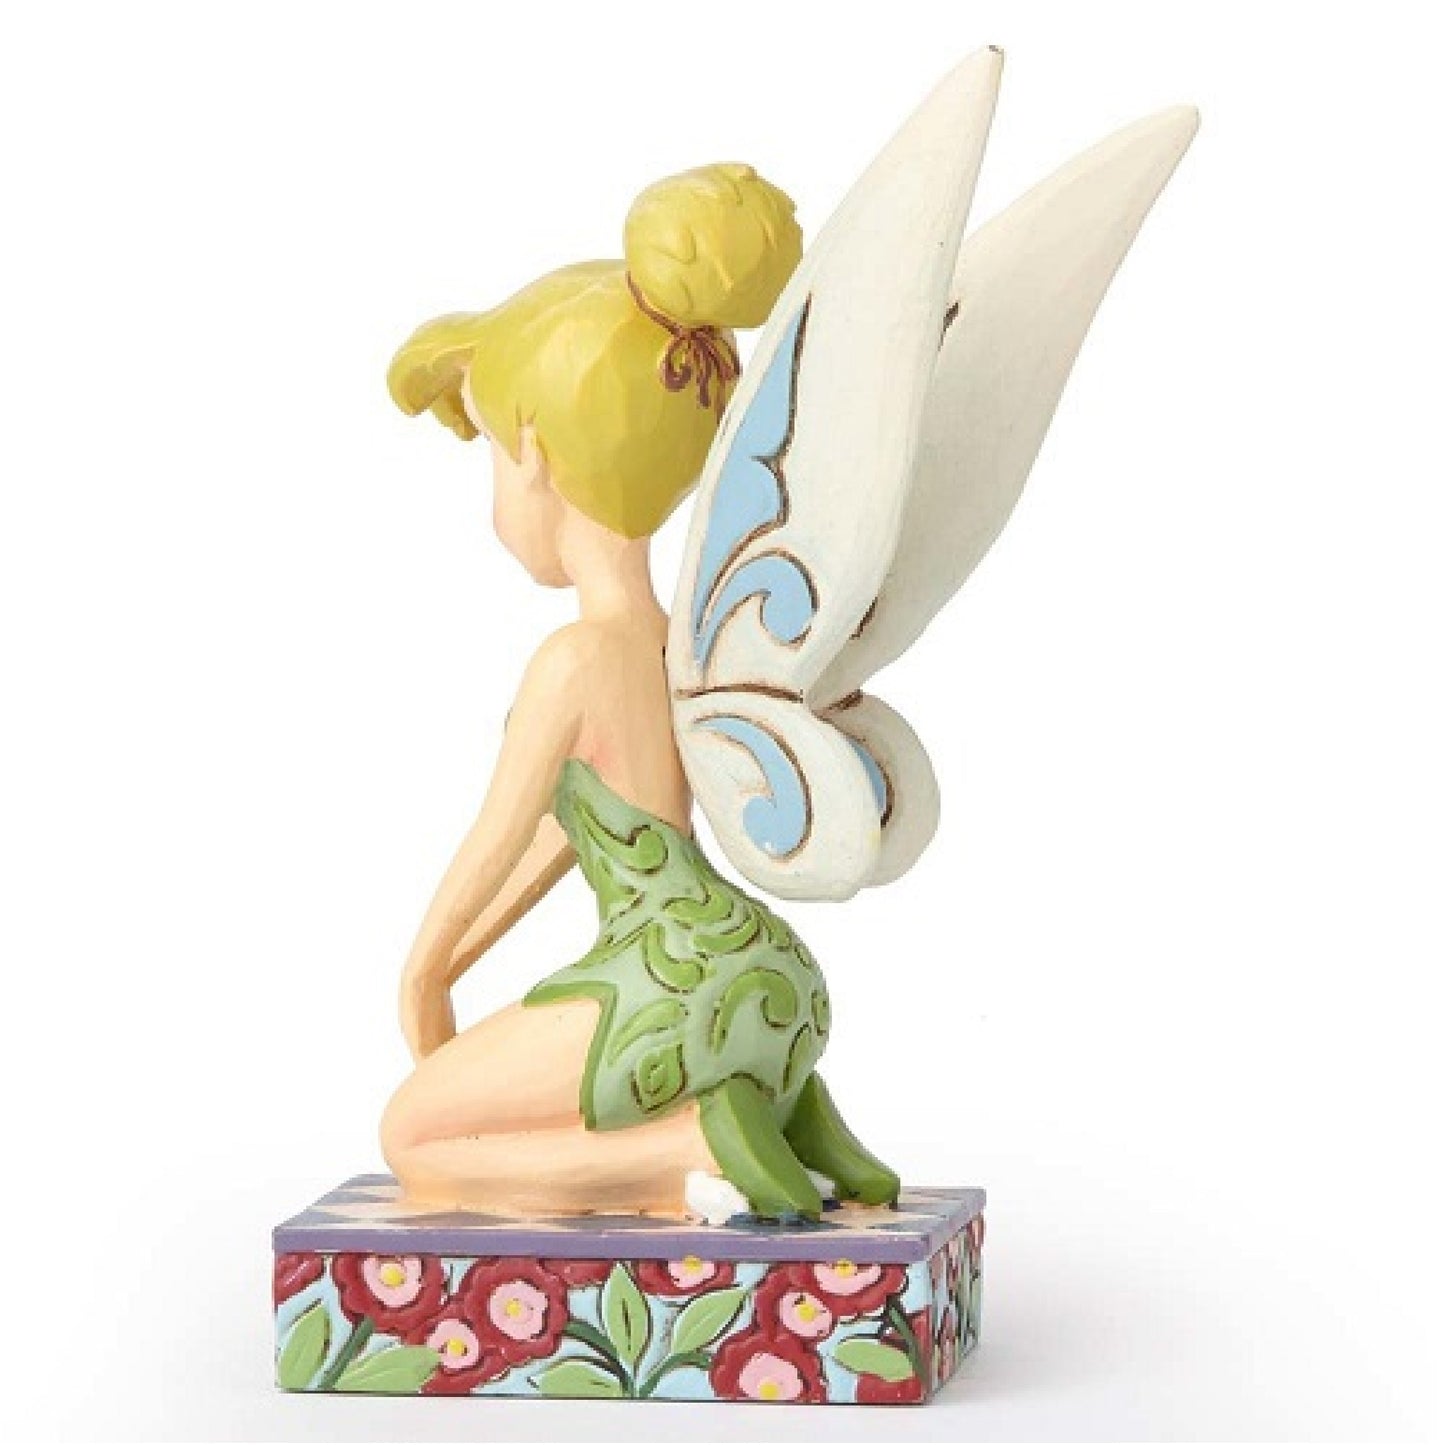 Disney Tinker Bell A Pixie Delight by Jim Shore